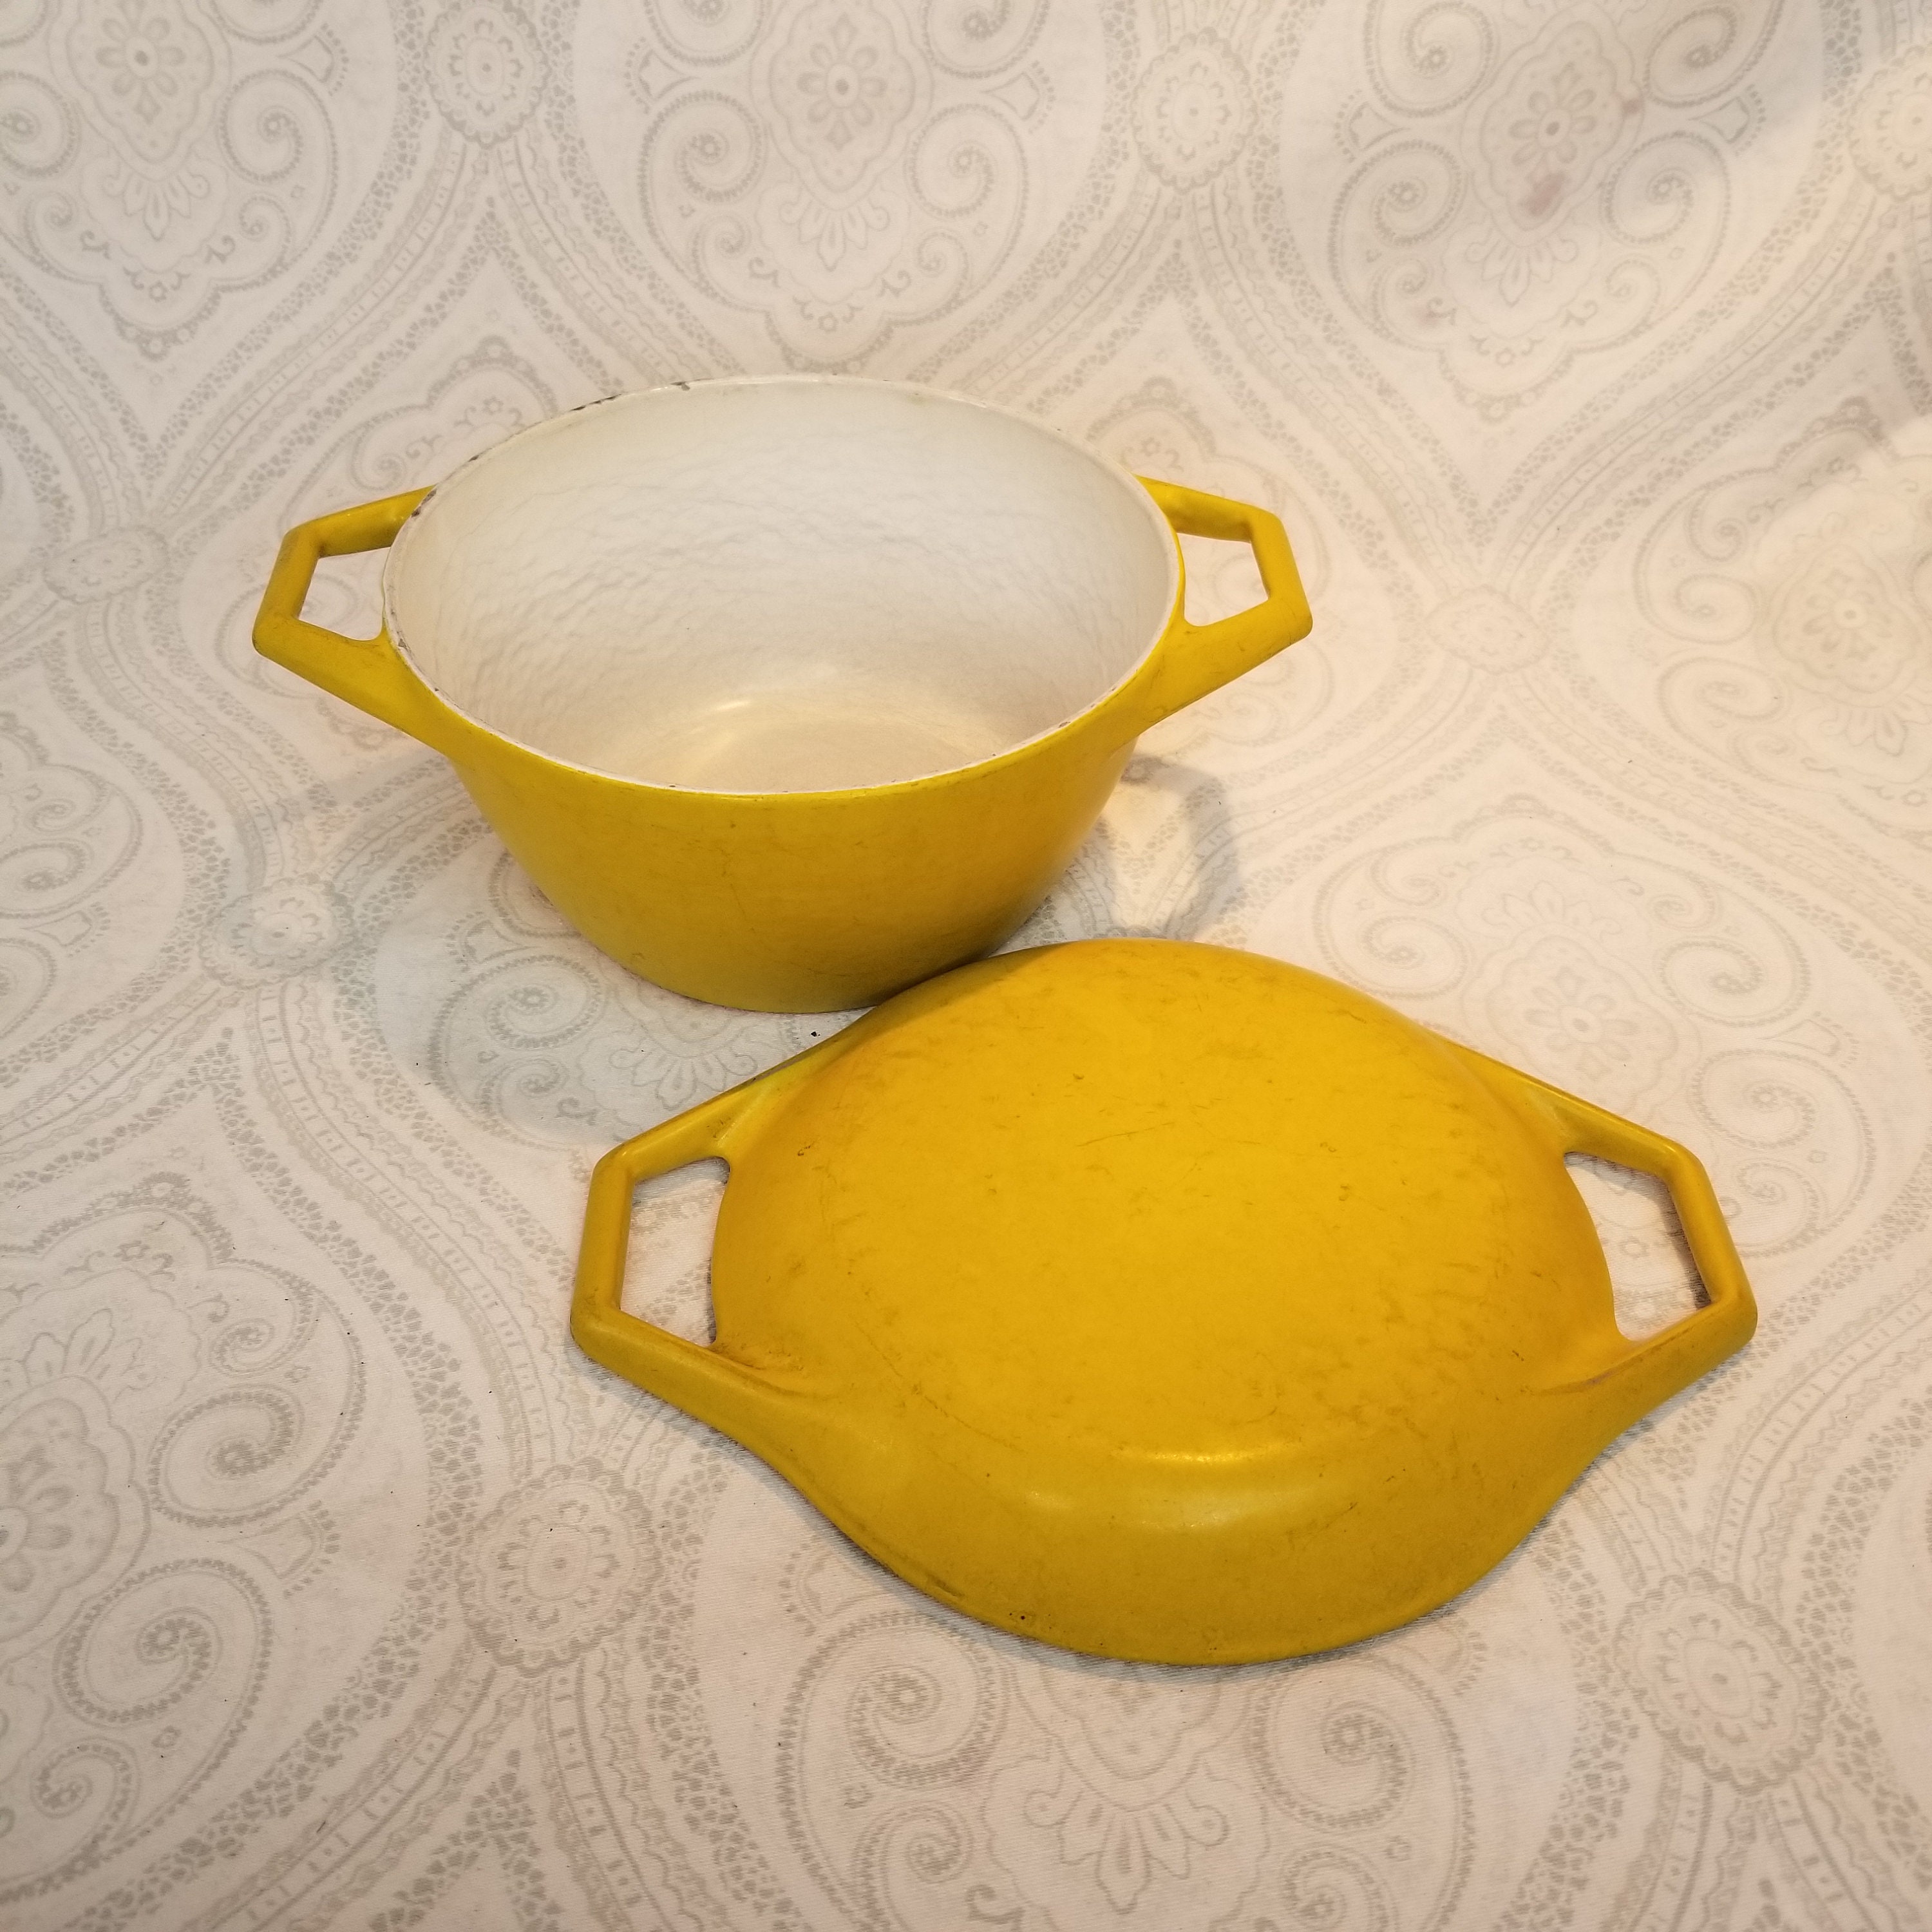 Sold at Auction: Vintage Copco Denmark Iron Enamel Cookware